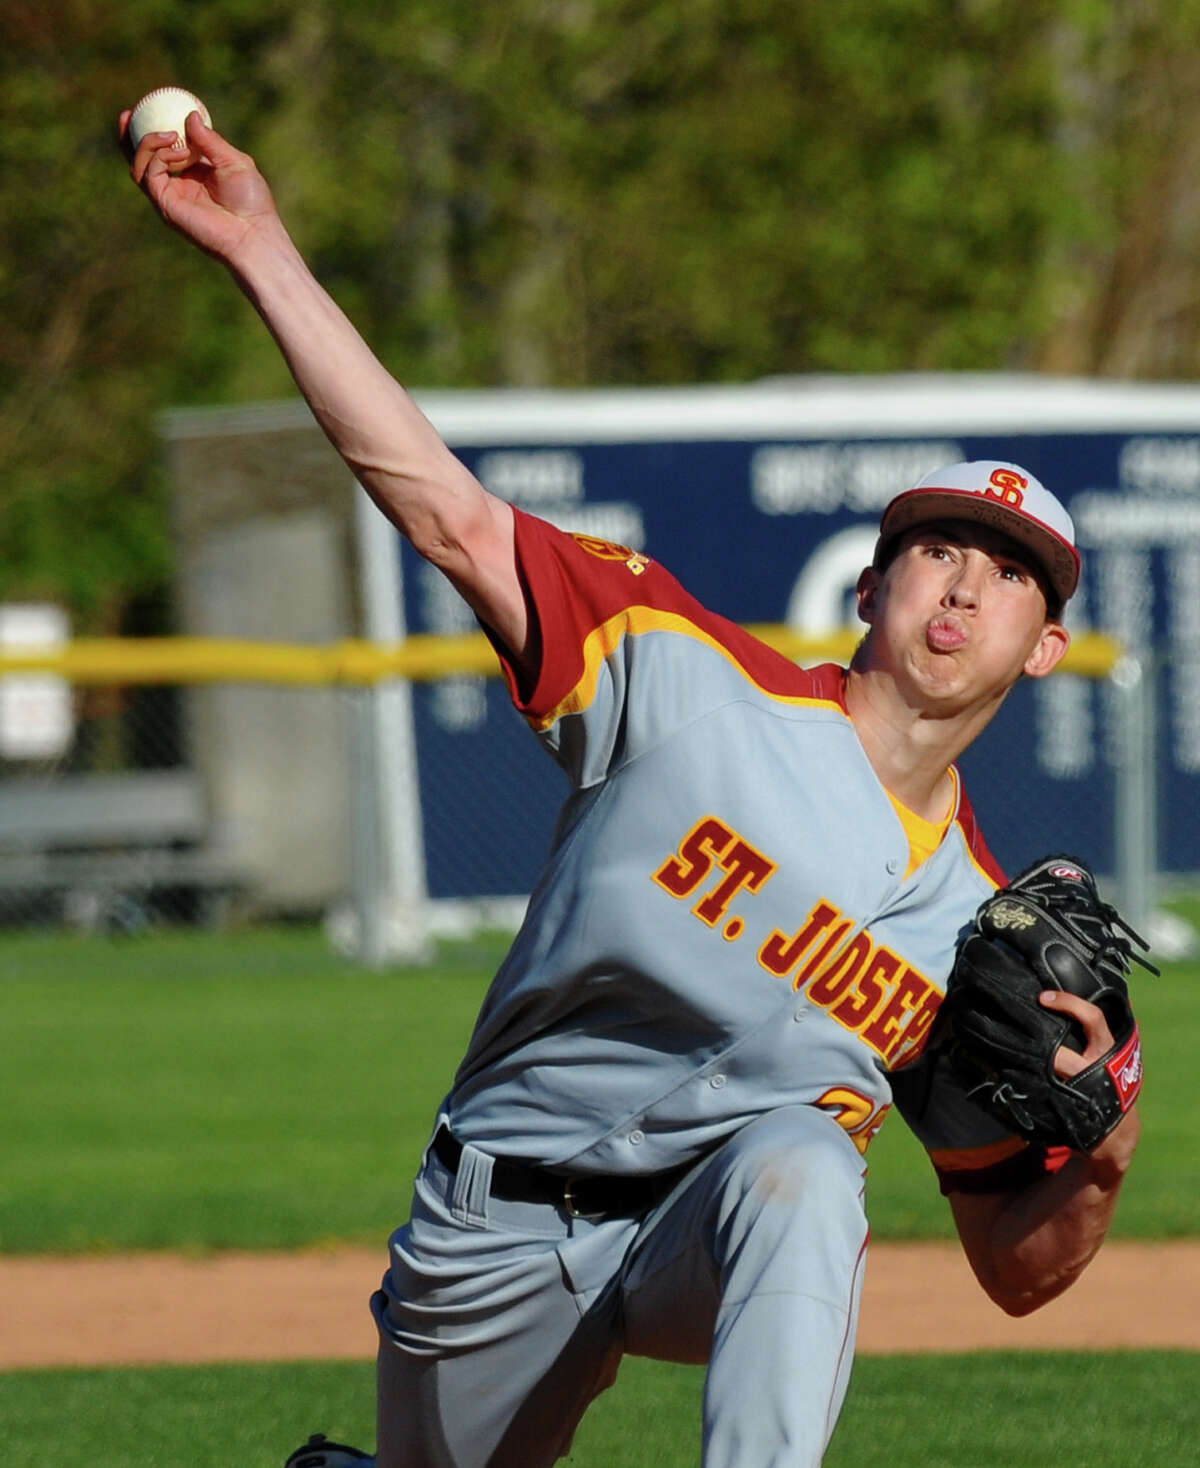 St. Joseph's Nick Williams pitches, during baseball action against Staples in Westport, Conn. on Wednesday May 1, 2013.